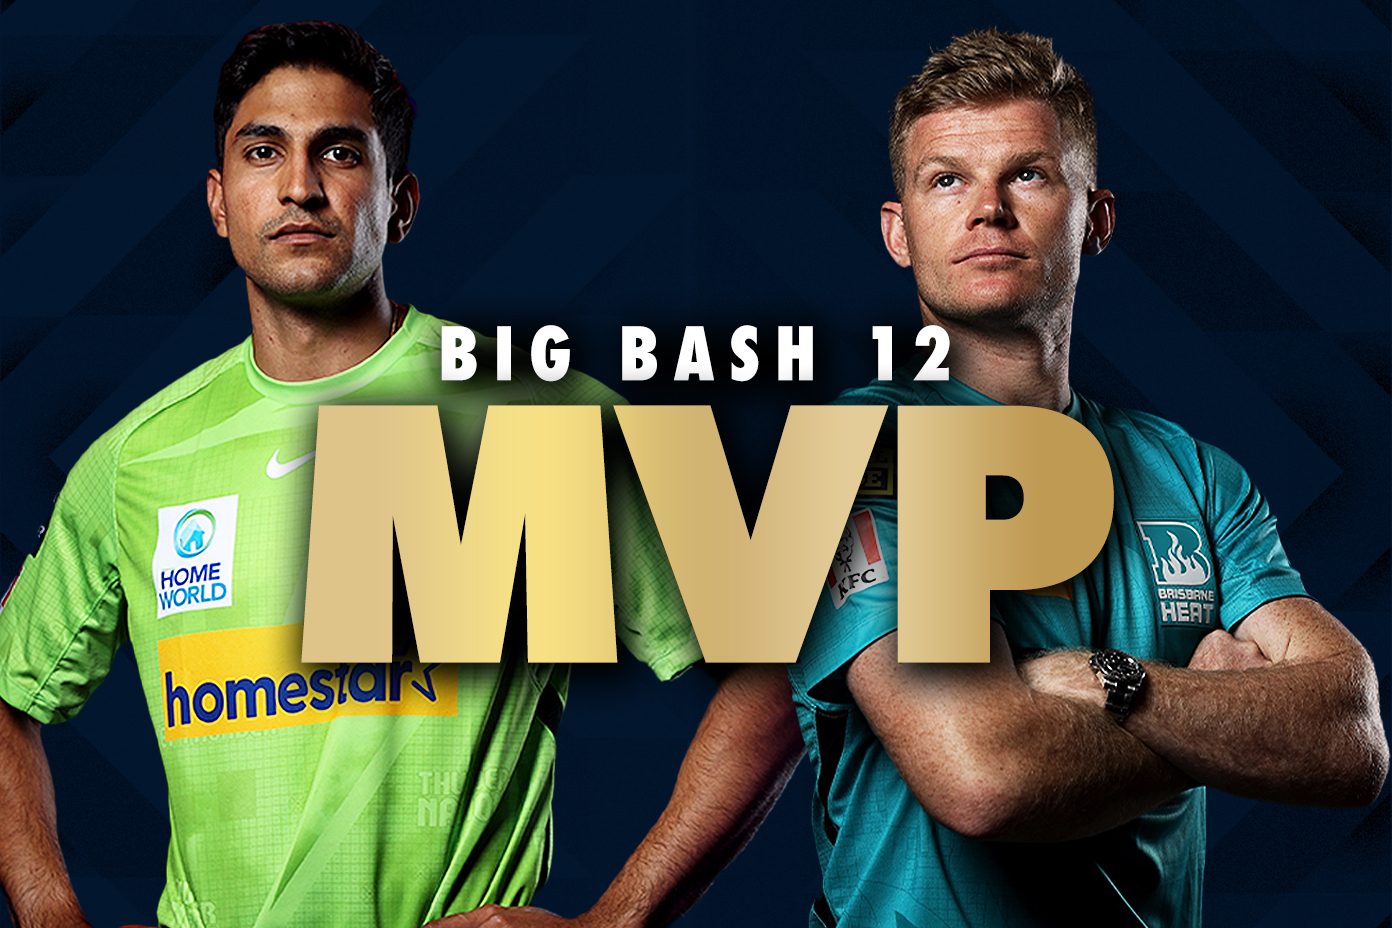 Big Bash League: BBL 2022 Player Draft Dates, Players, New Rules, Retention  -- All You Need To Know - myKhel